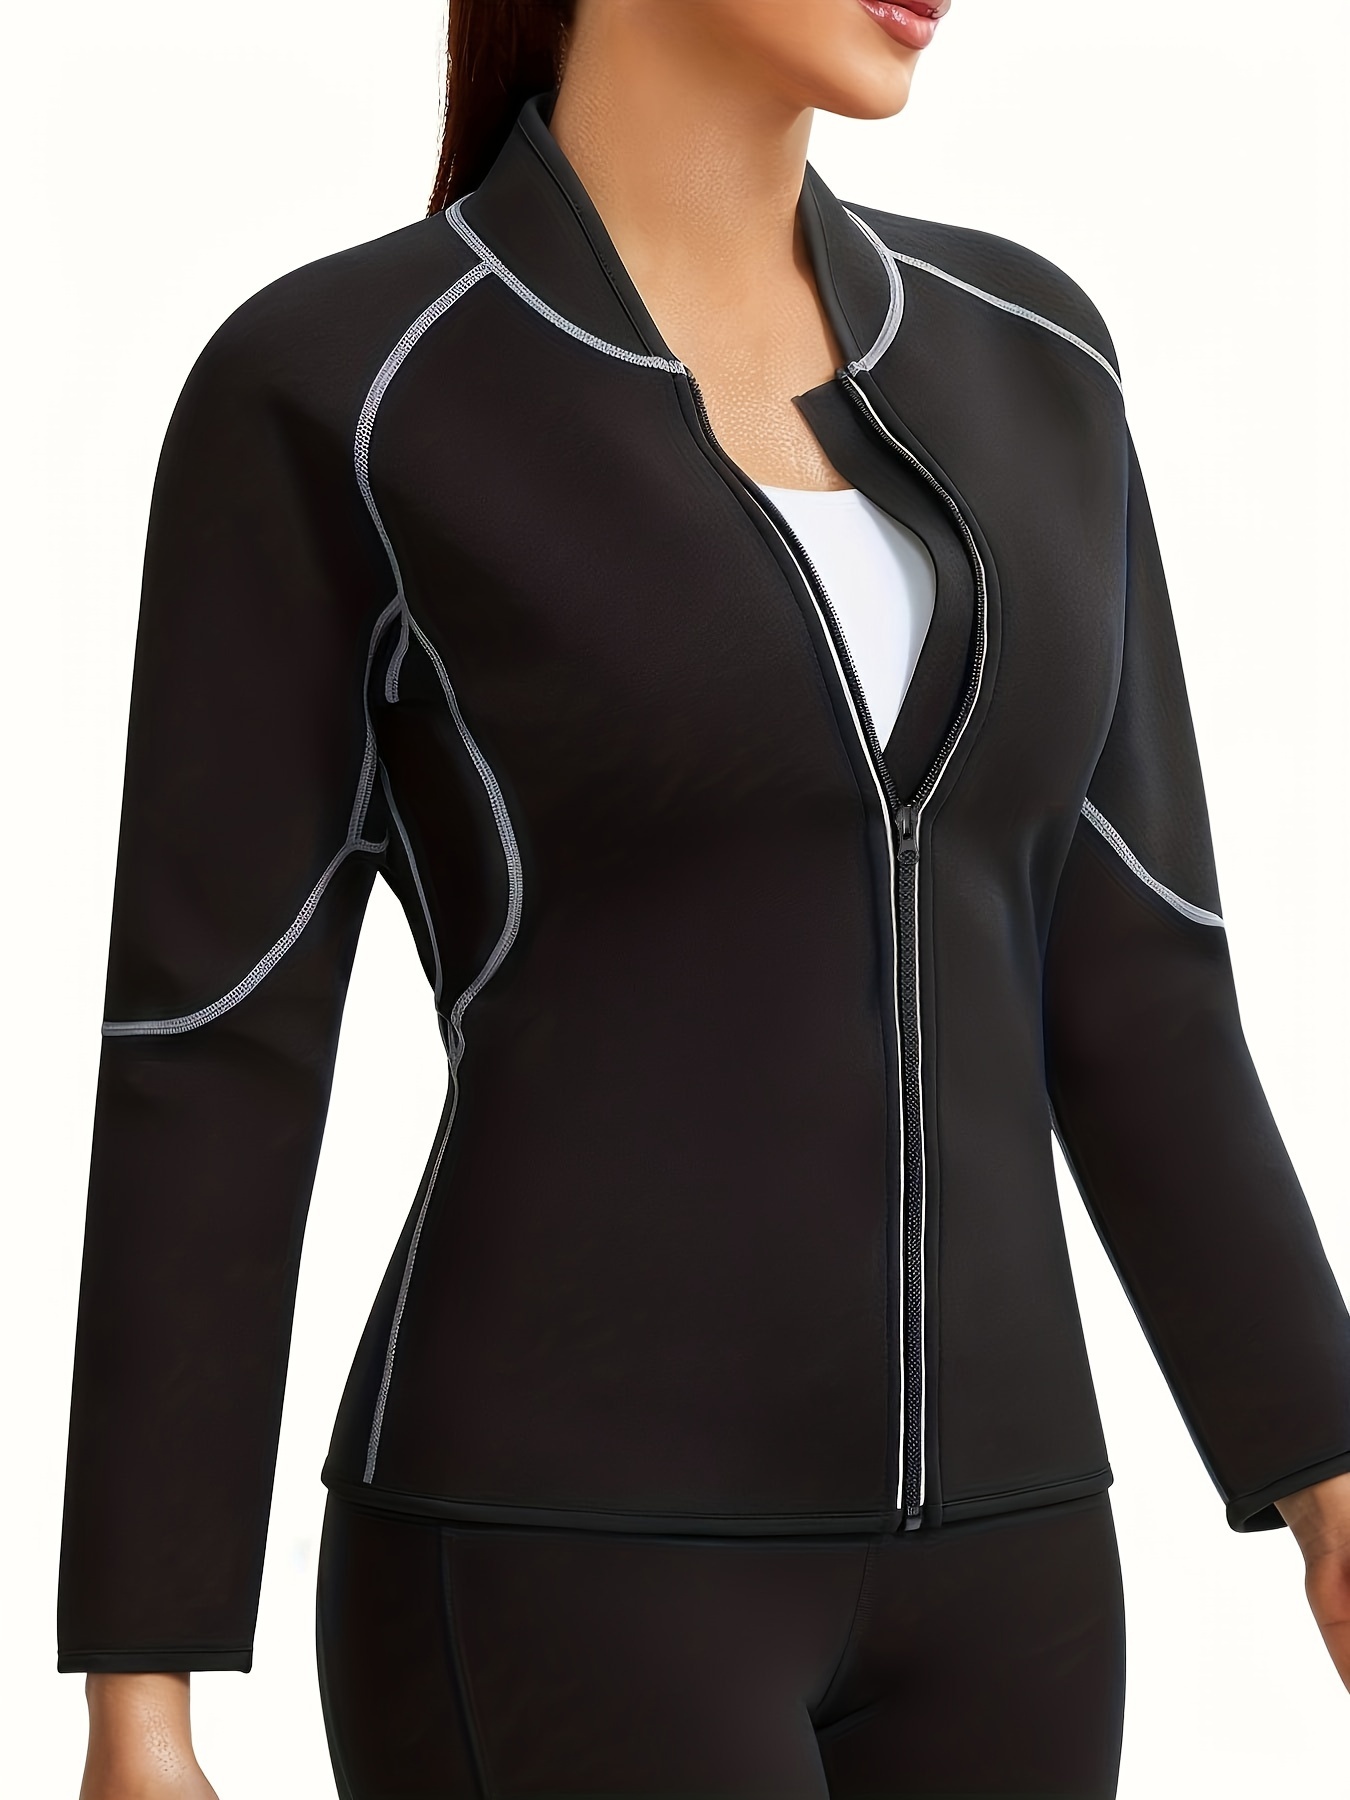 Long Sleeve Hooded Jacket, Breathable Sheer Mesh Running Workout Sports  Top, Women's Tops